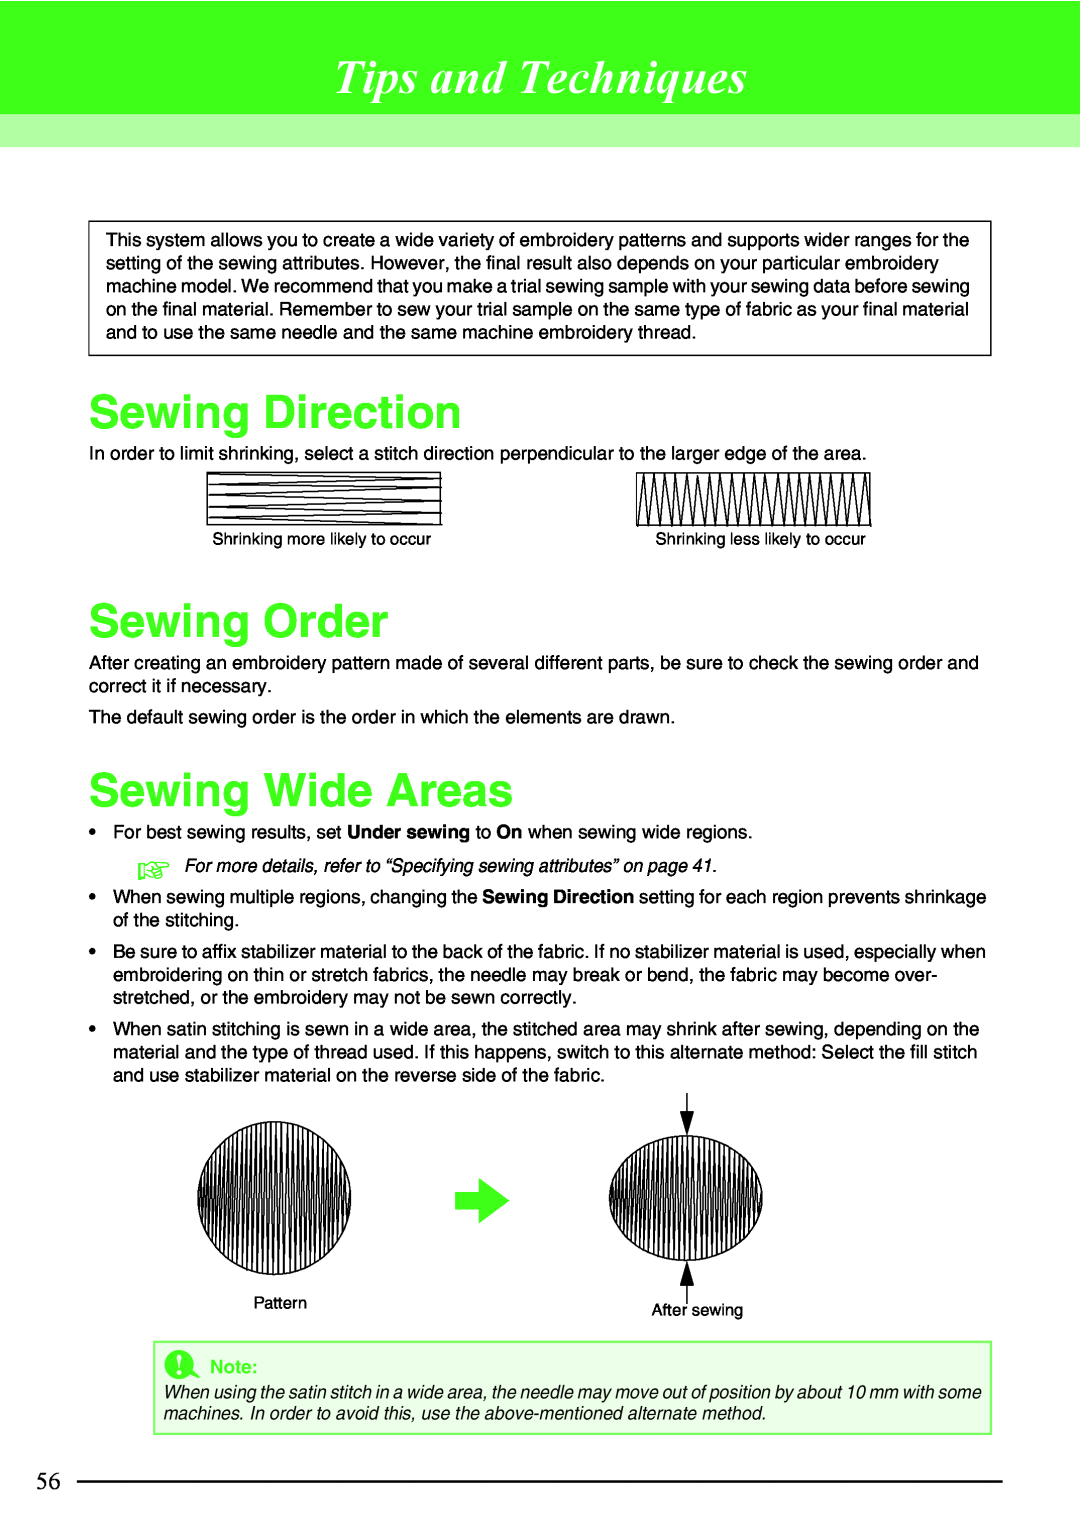 Brother PE-DESIGN, Brother USB Writer manual Tips and Techniques, Sewing Direction, Sewing Order, Sewing Wide Areas, a Note 